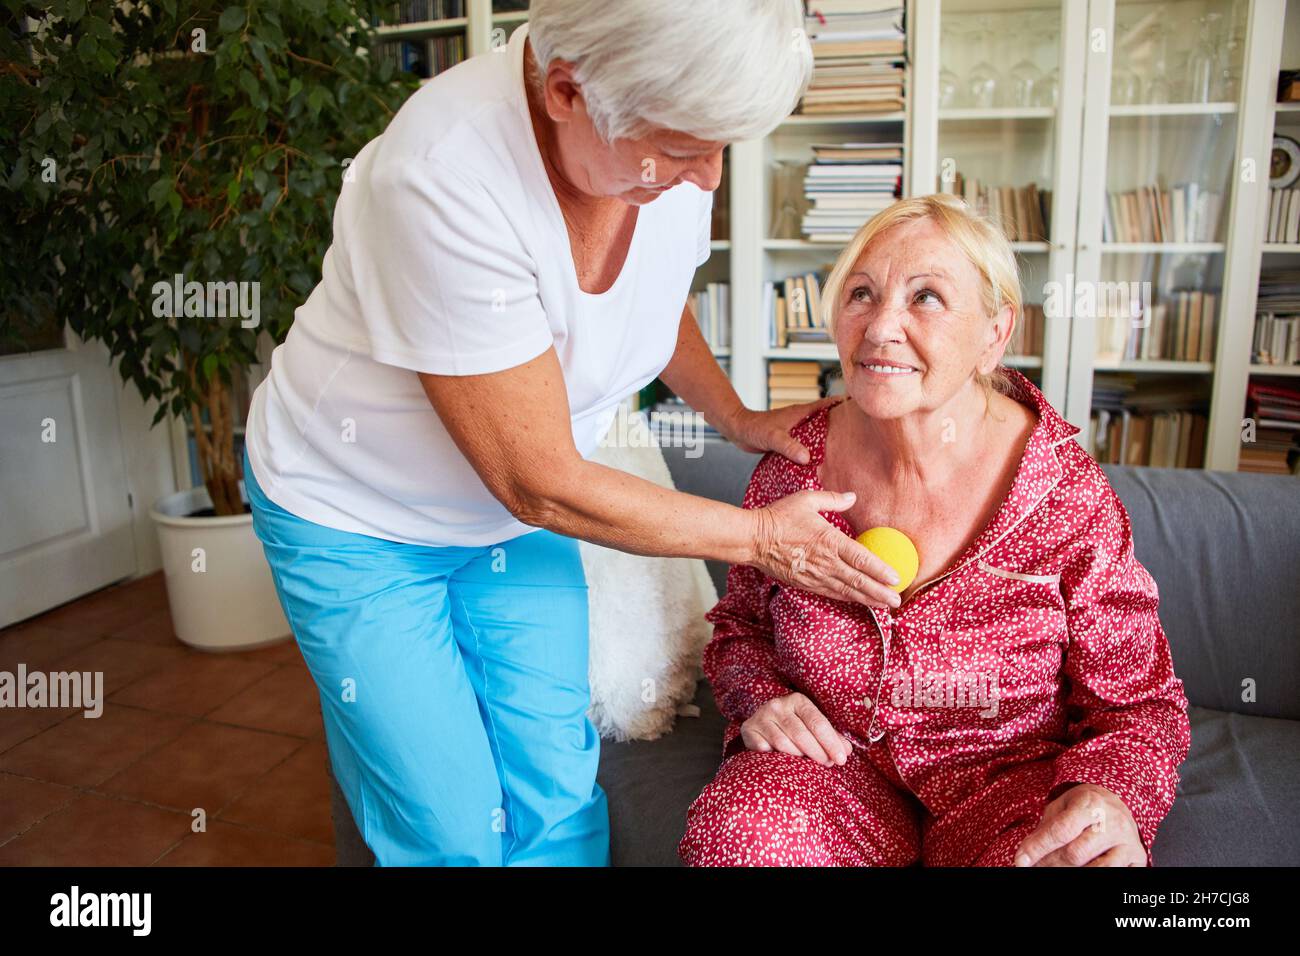 Elderly woman receives a trigger point massage as acupressure with a small massage ball Stock Photo